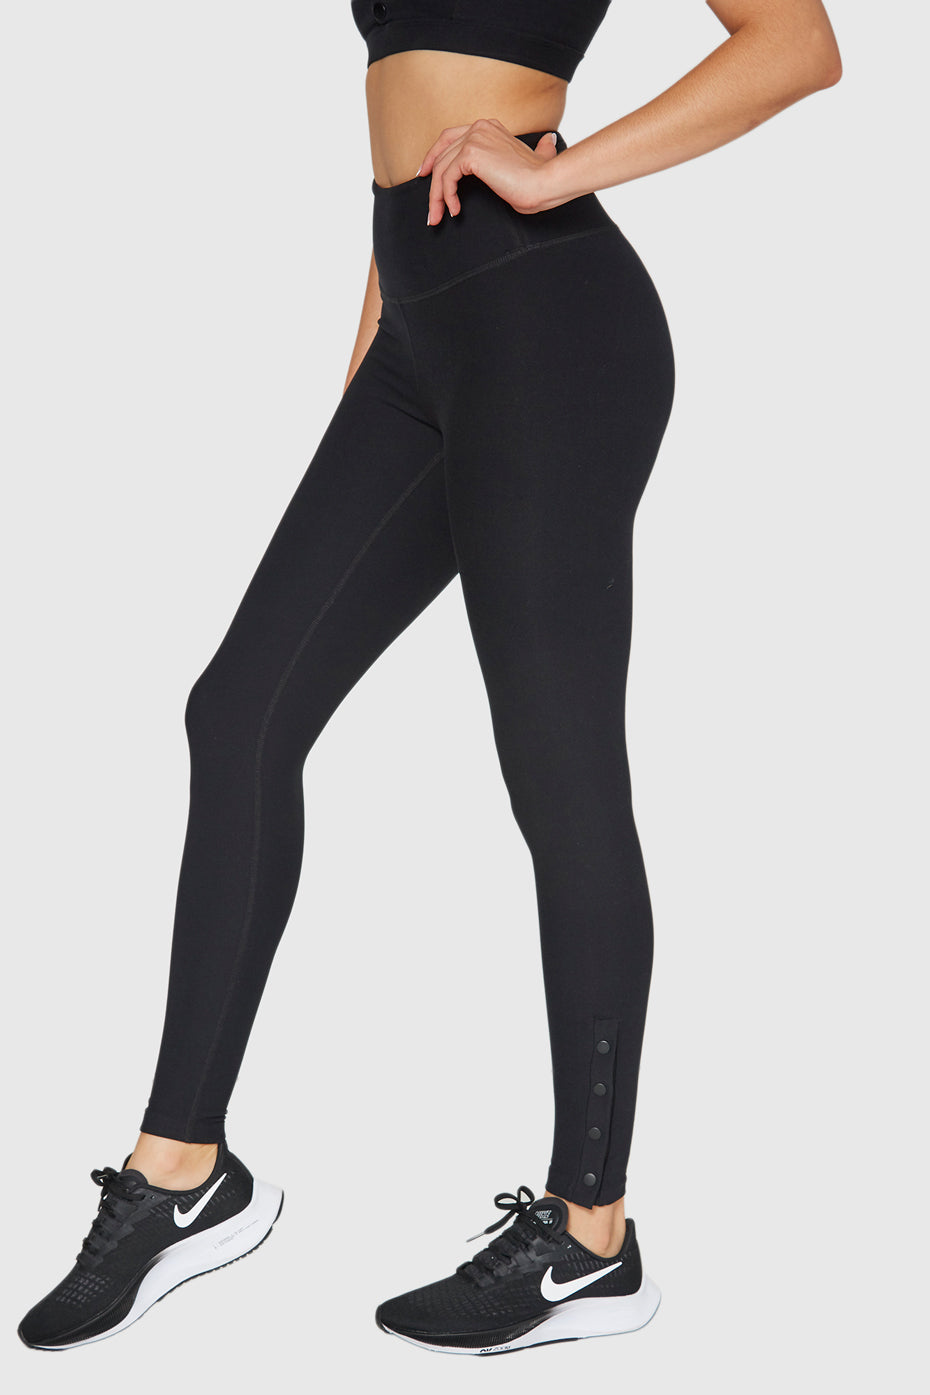 Women's Sports Leggings, Yoga Pants, High Waist, Tight-fitting And  One-piece, Nine-point Length | SHEIN